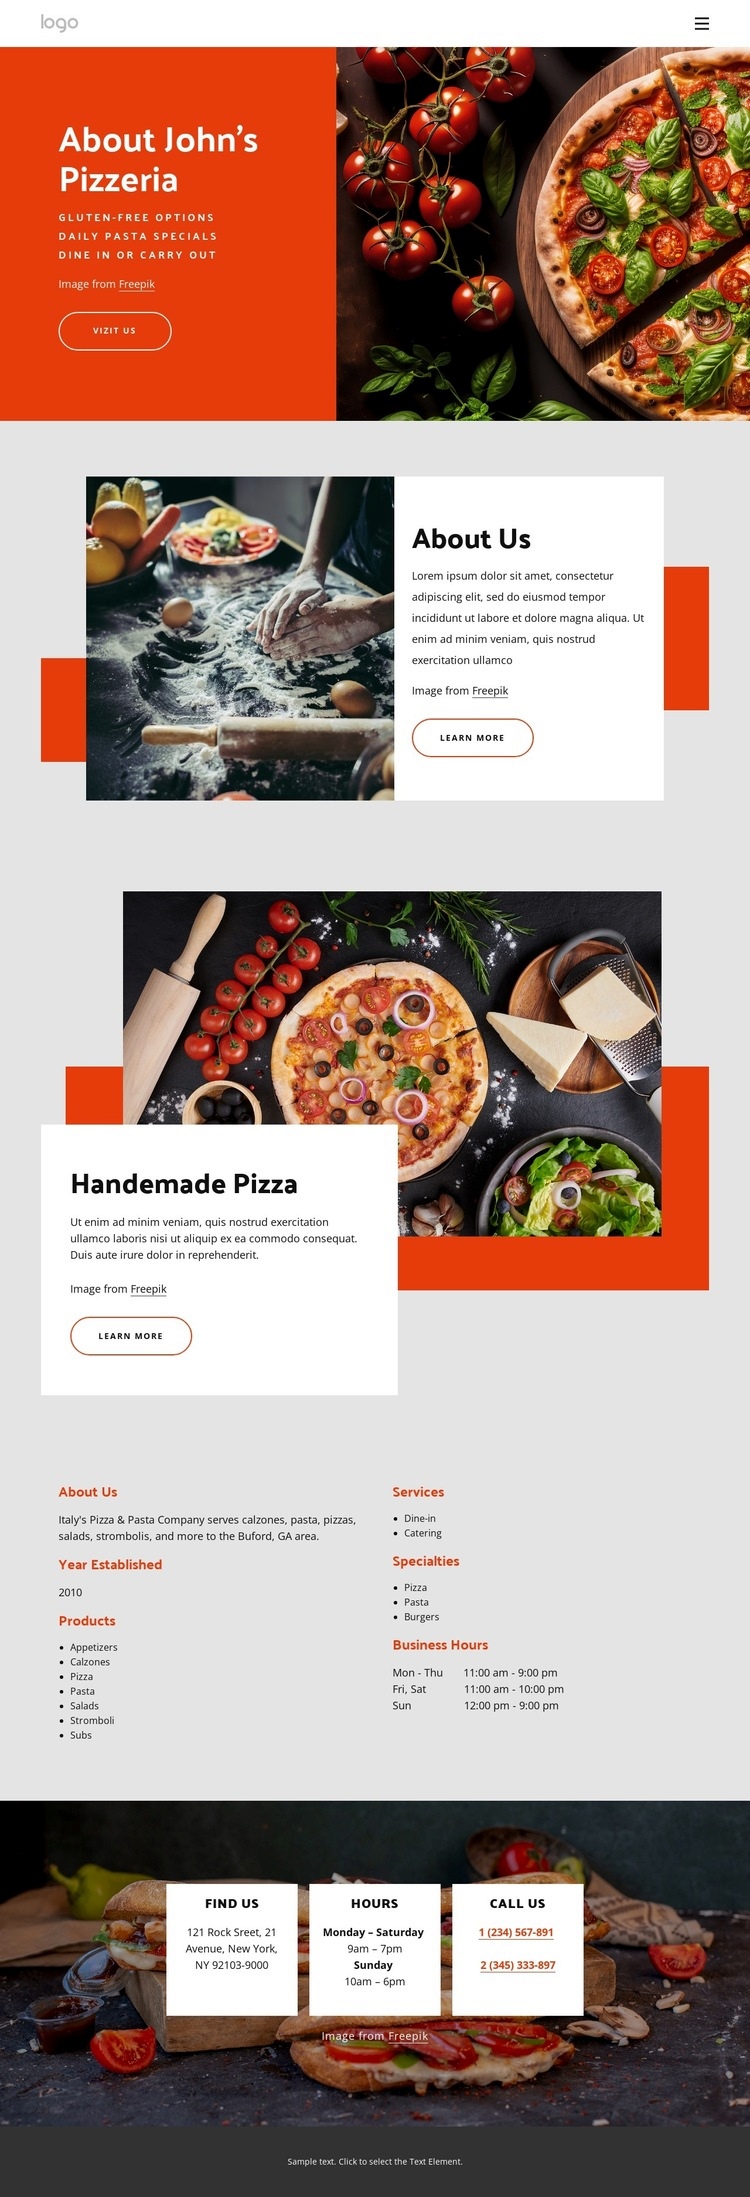 About our pizzeria Webflow Template Alternative